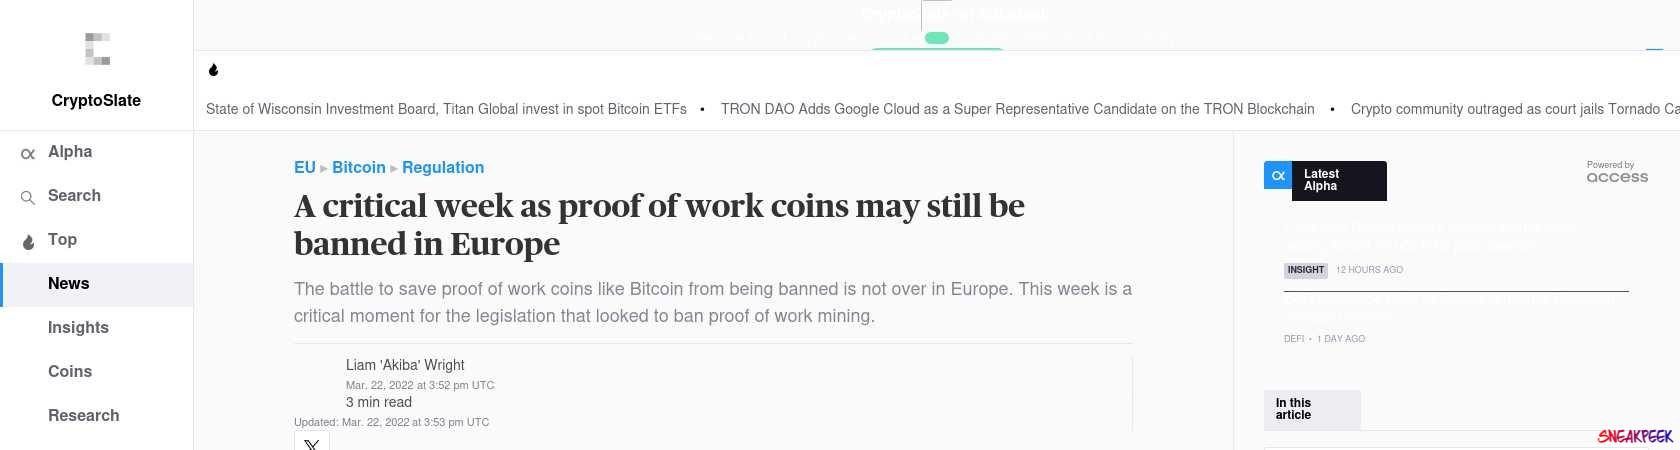 Read the full Article:  ⭲ A critical week as proof of work coins may still be banned in Europe